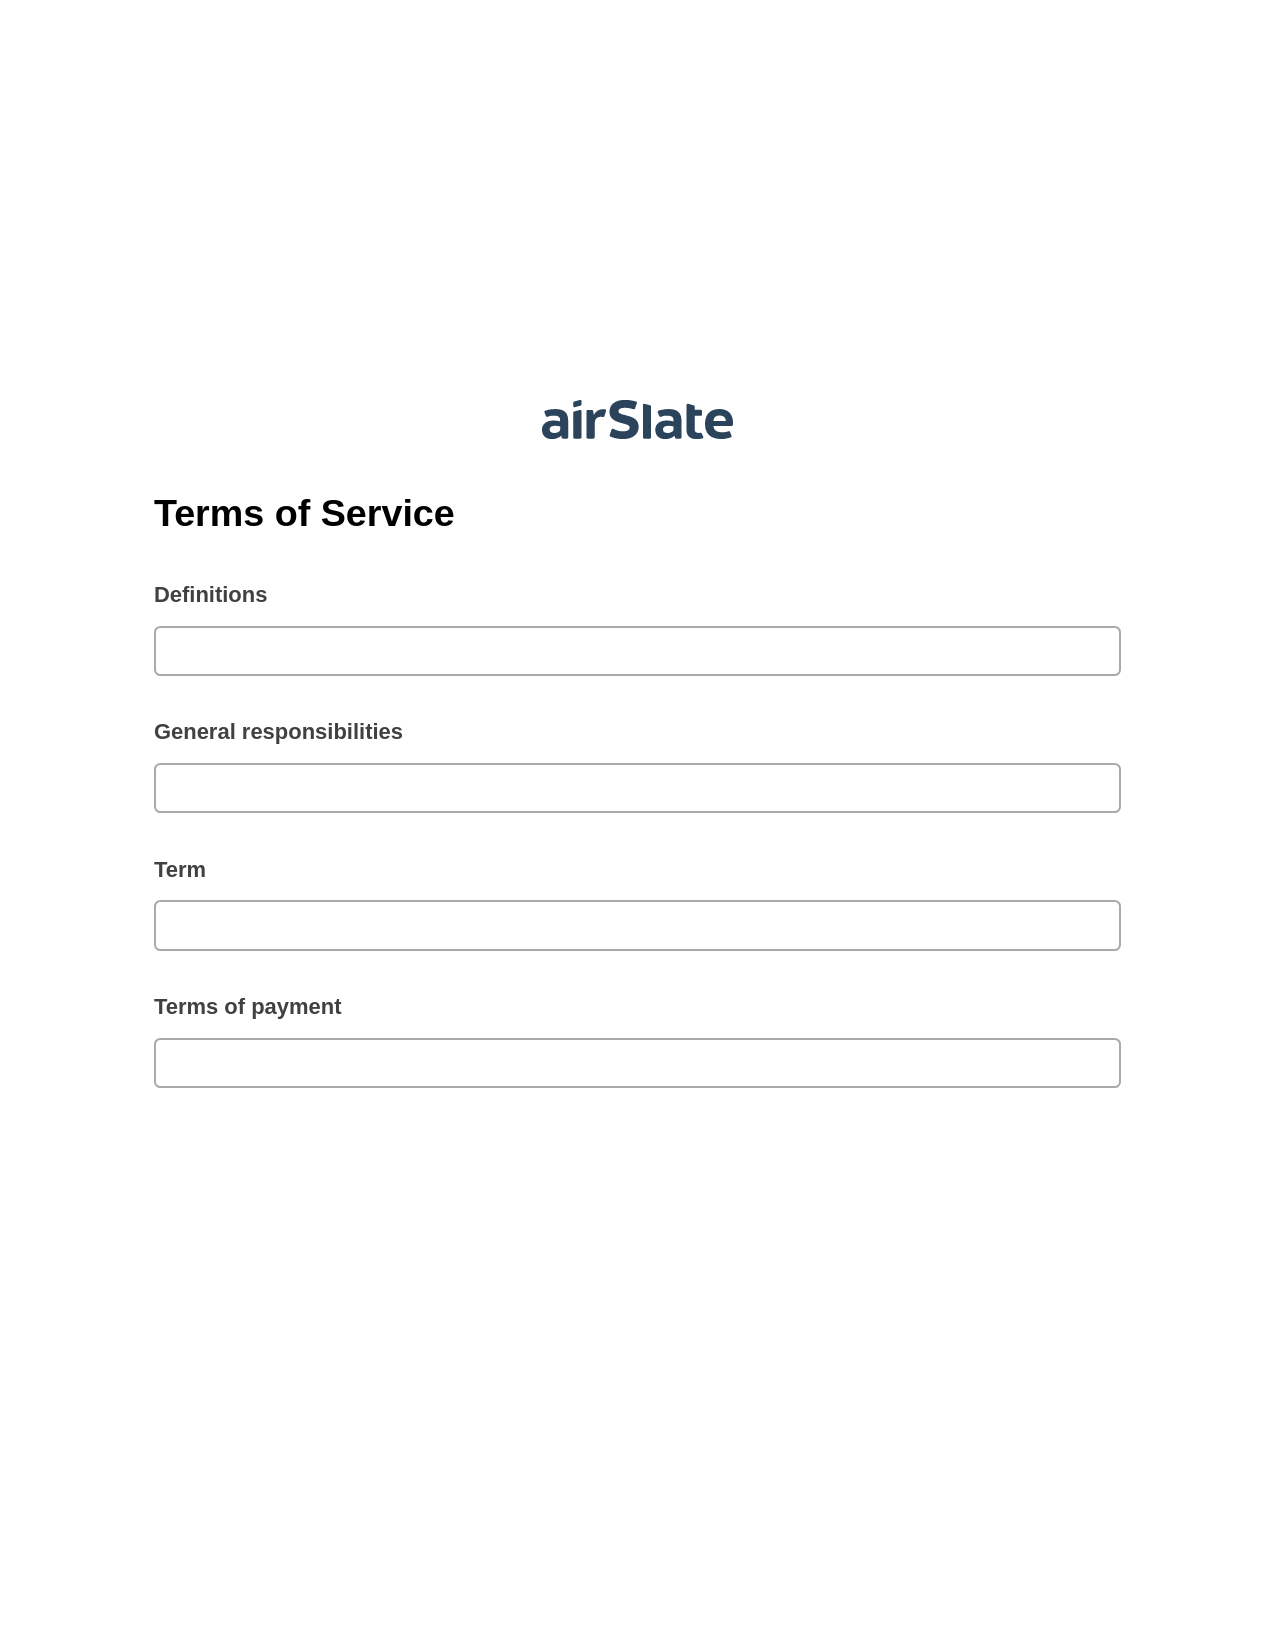 Terms of Service Pre-fill Slate from MS Dynamics 365 Records Bot, Update NetSuite Records Bot, Google Drive Bot